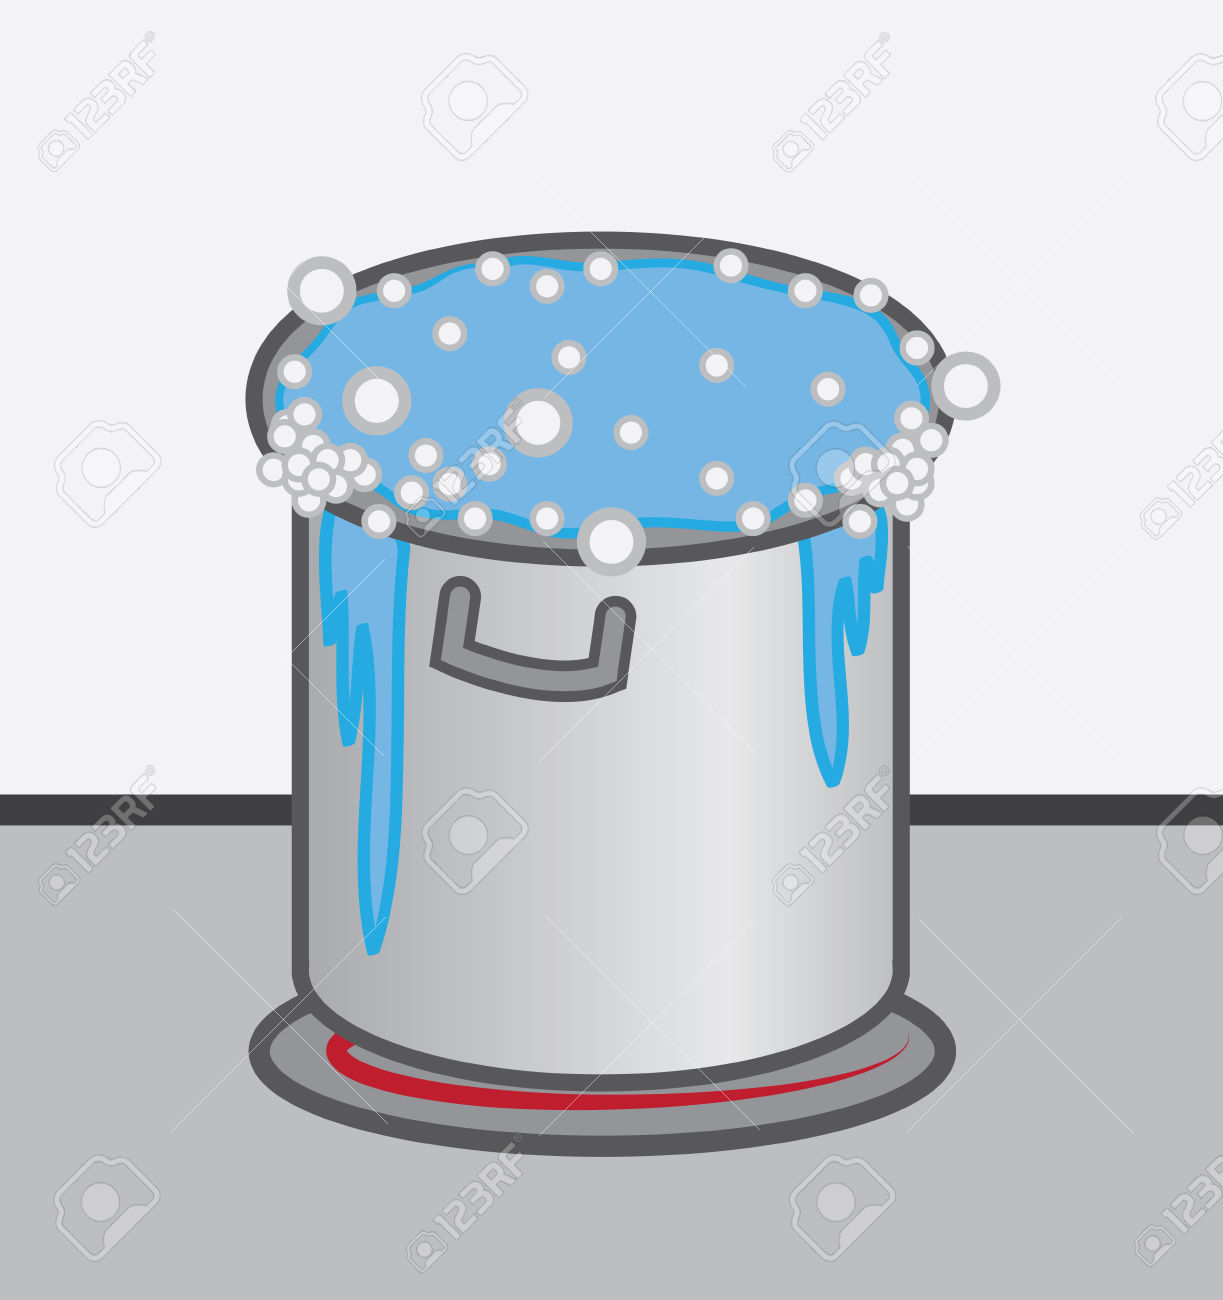 3,355 Boiling Water Stock Vector Illustration And Royalty Free.